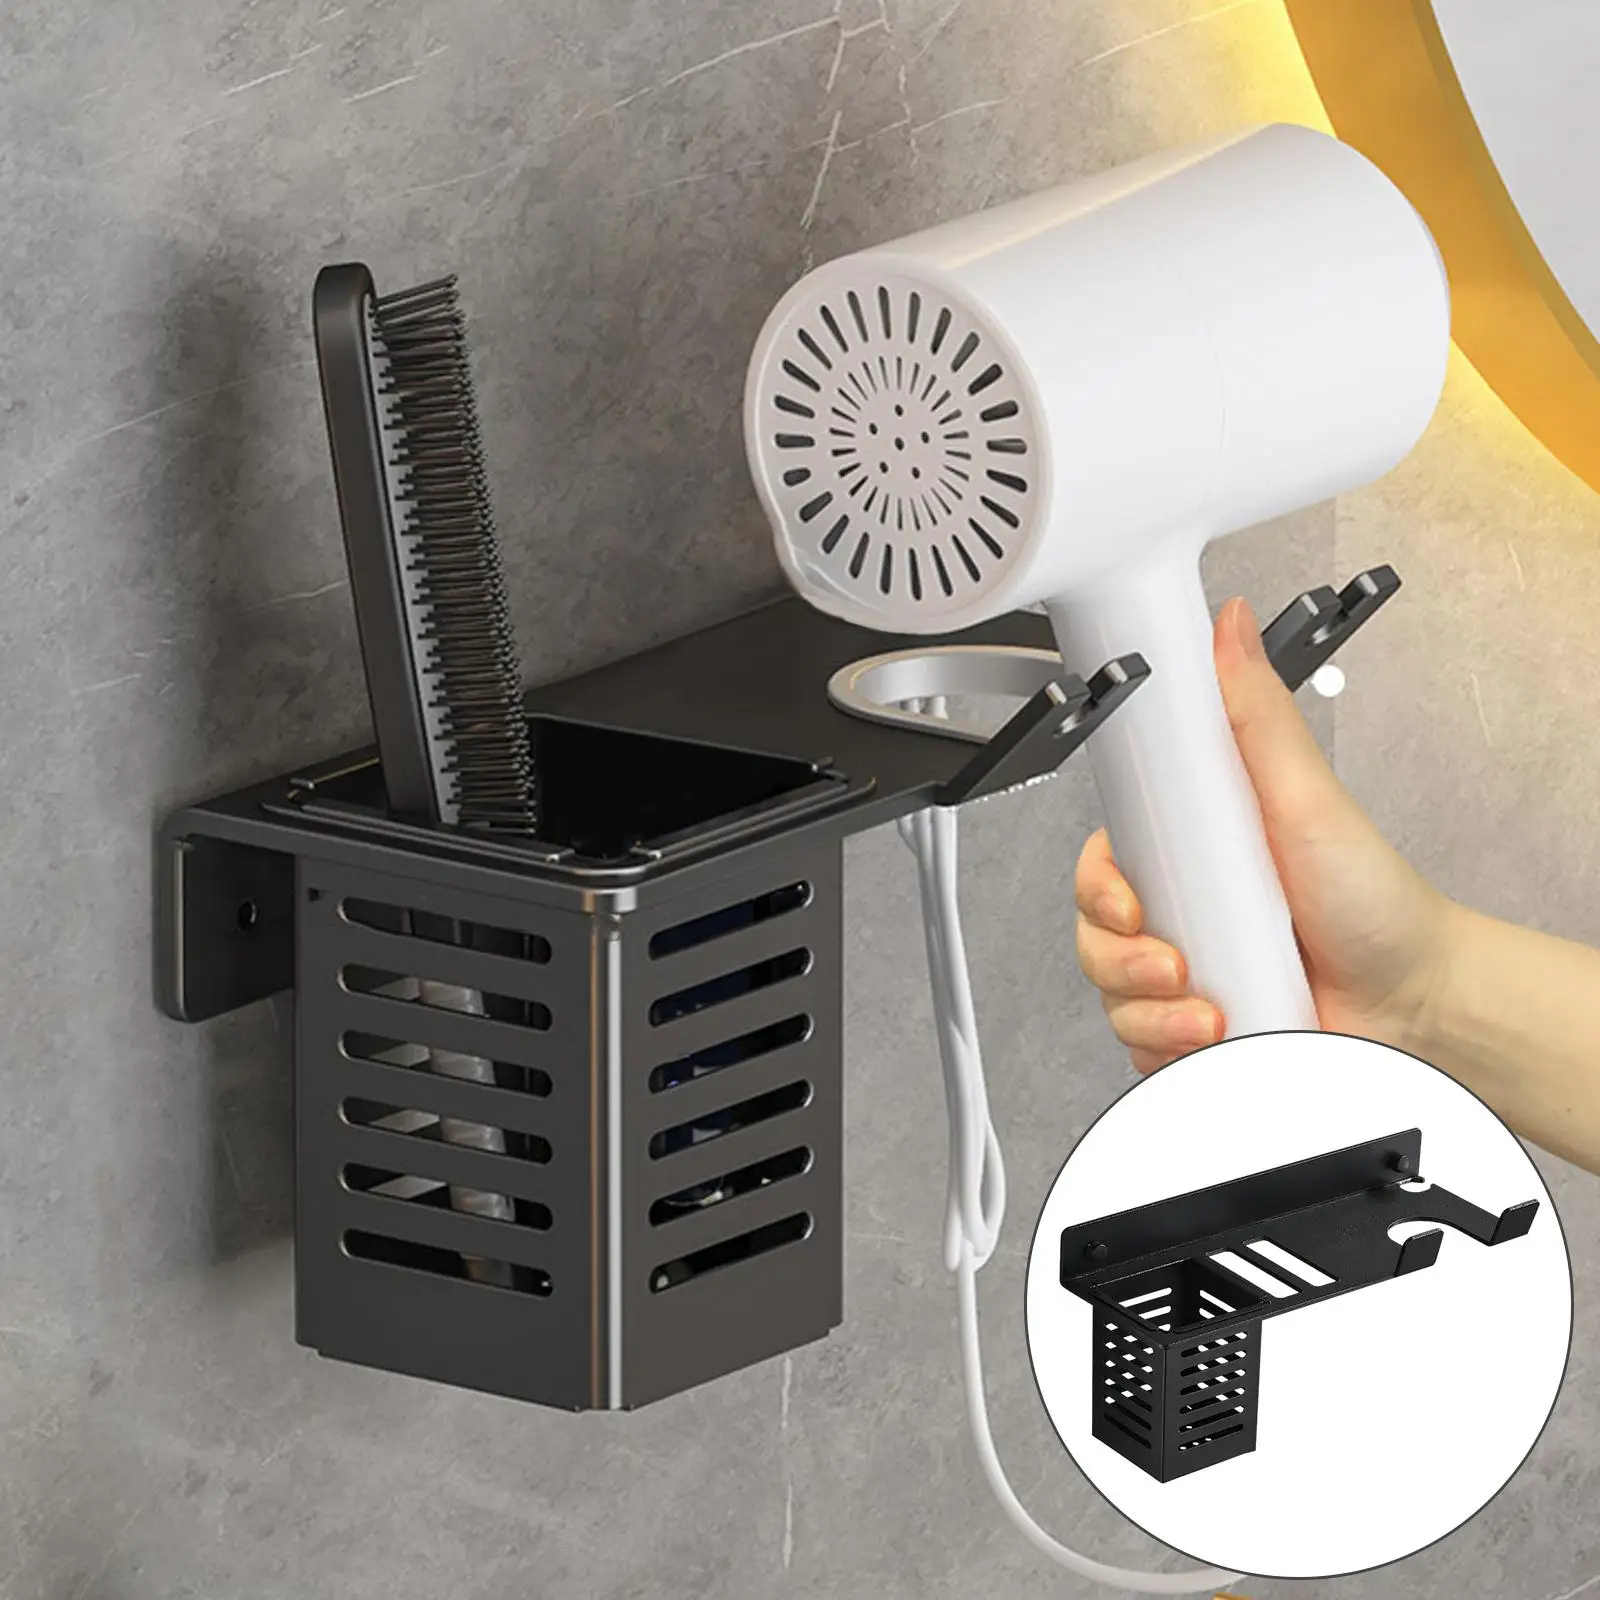 Hair Dryer Holder Wall Mounted Multifunctional Bathroom Shelf Storage for Curling Irons Makeup Brushes Hair Dryers Combs Bedroom